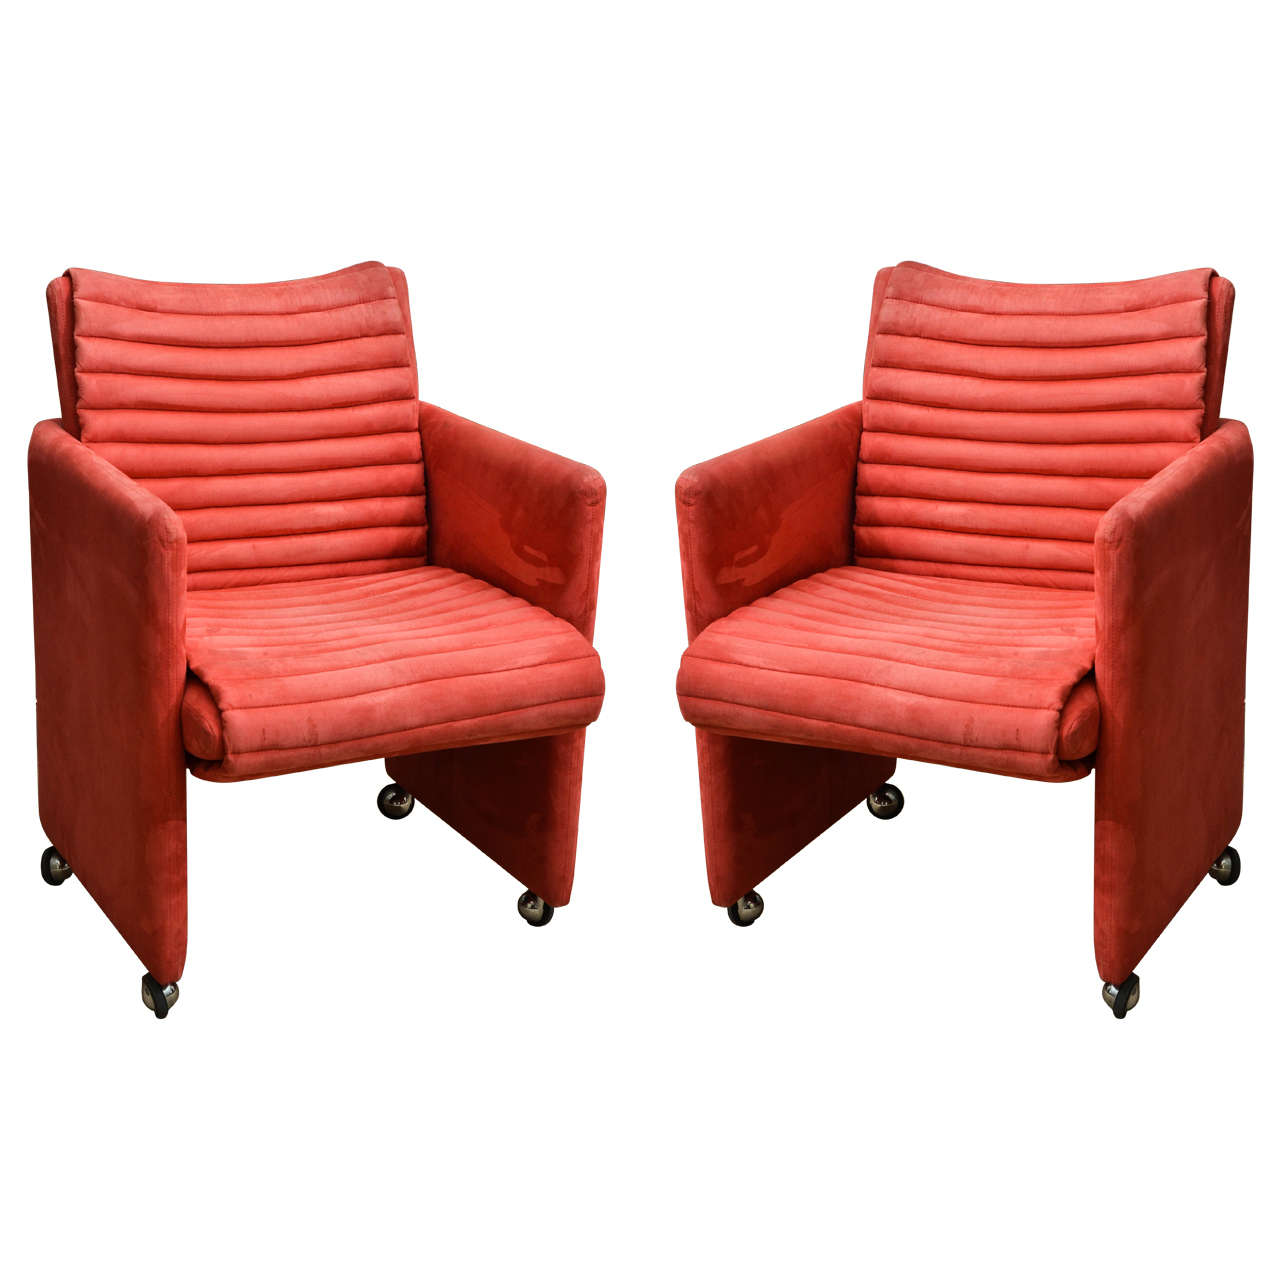  Pair of Coral Suede Channel Quilted Arm Chairs on Castors by Milo Baughman For Sale